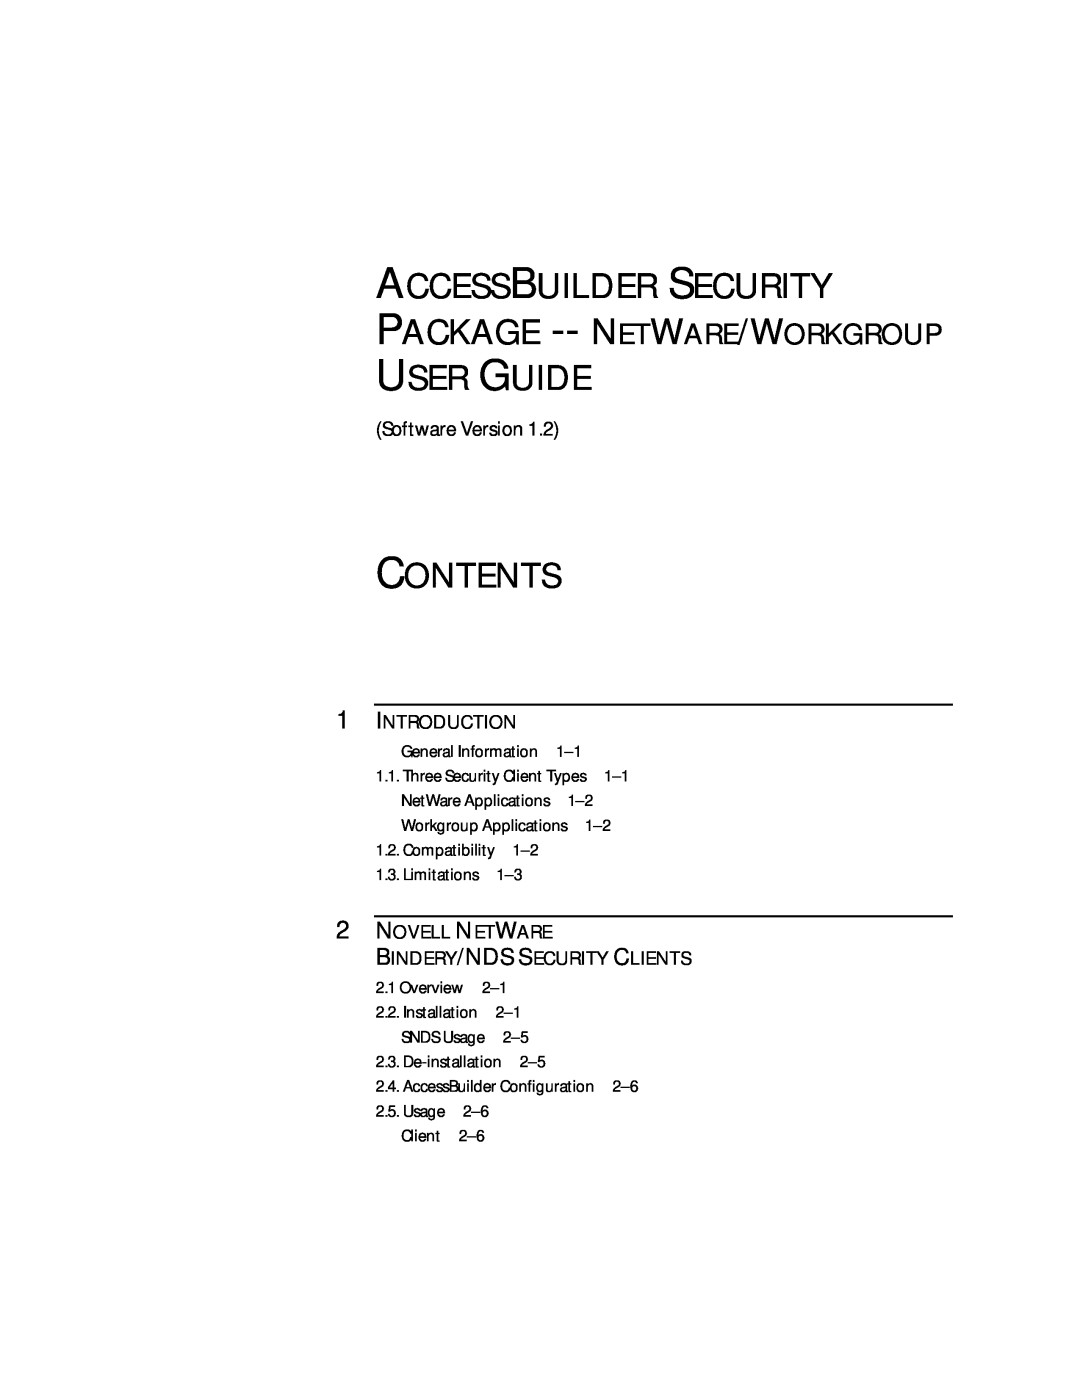 3Com 09-0704-001 manual Contents, Accessbuilder Security, User Guide, Package -- Netware/Workgroup, Introduction 